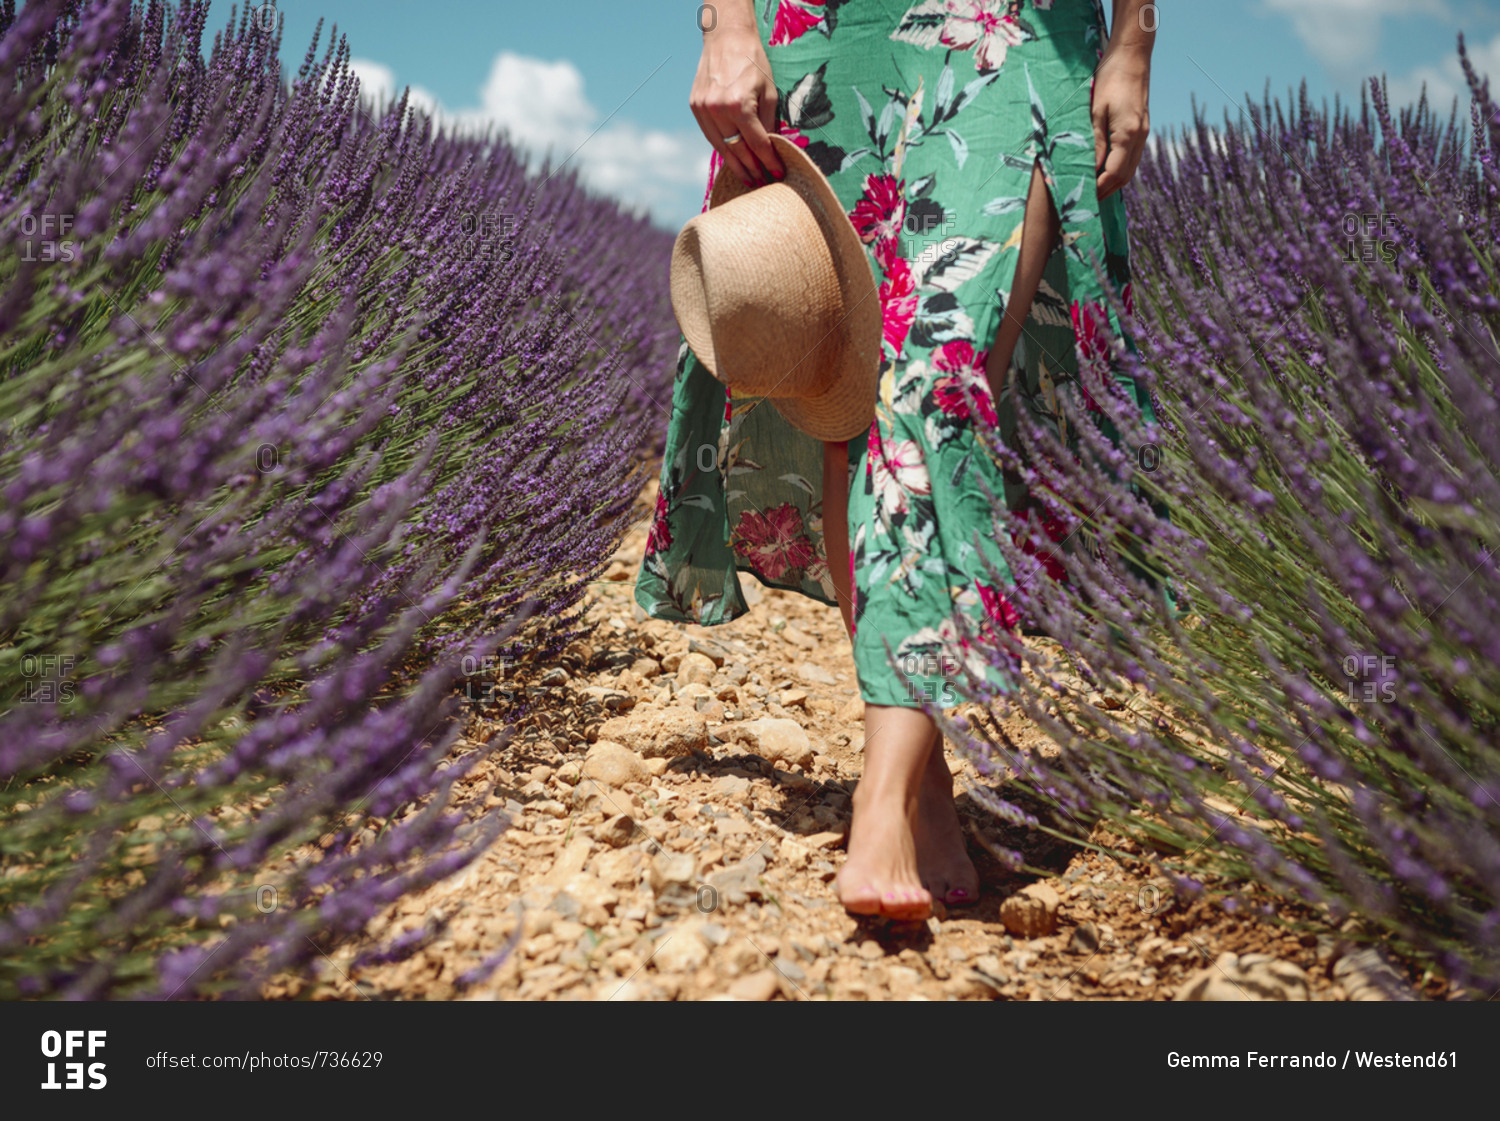 France- Provence- Valensole plateau- Barefoot woman walking among lavender fields in the summer